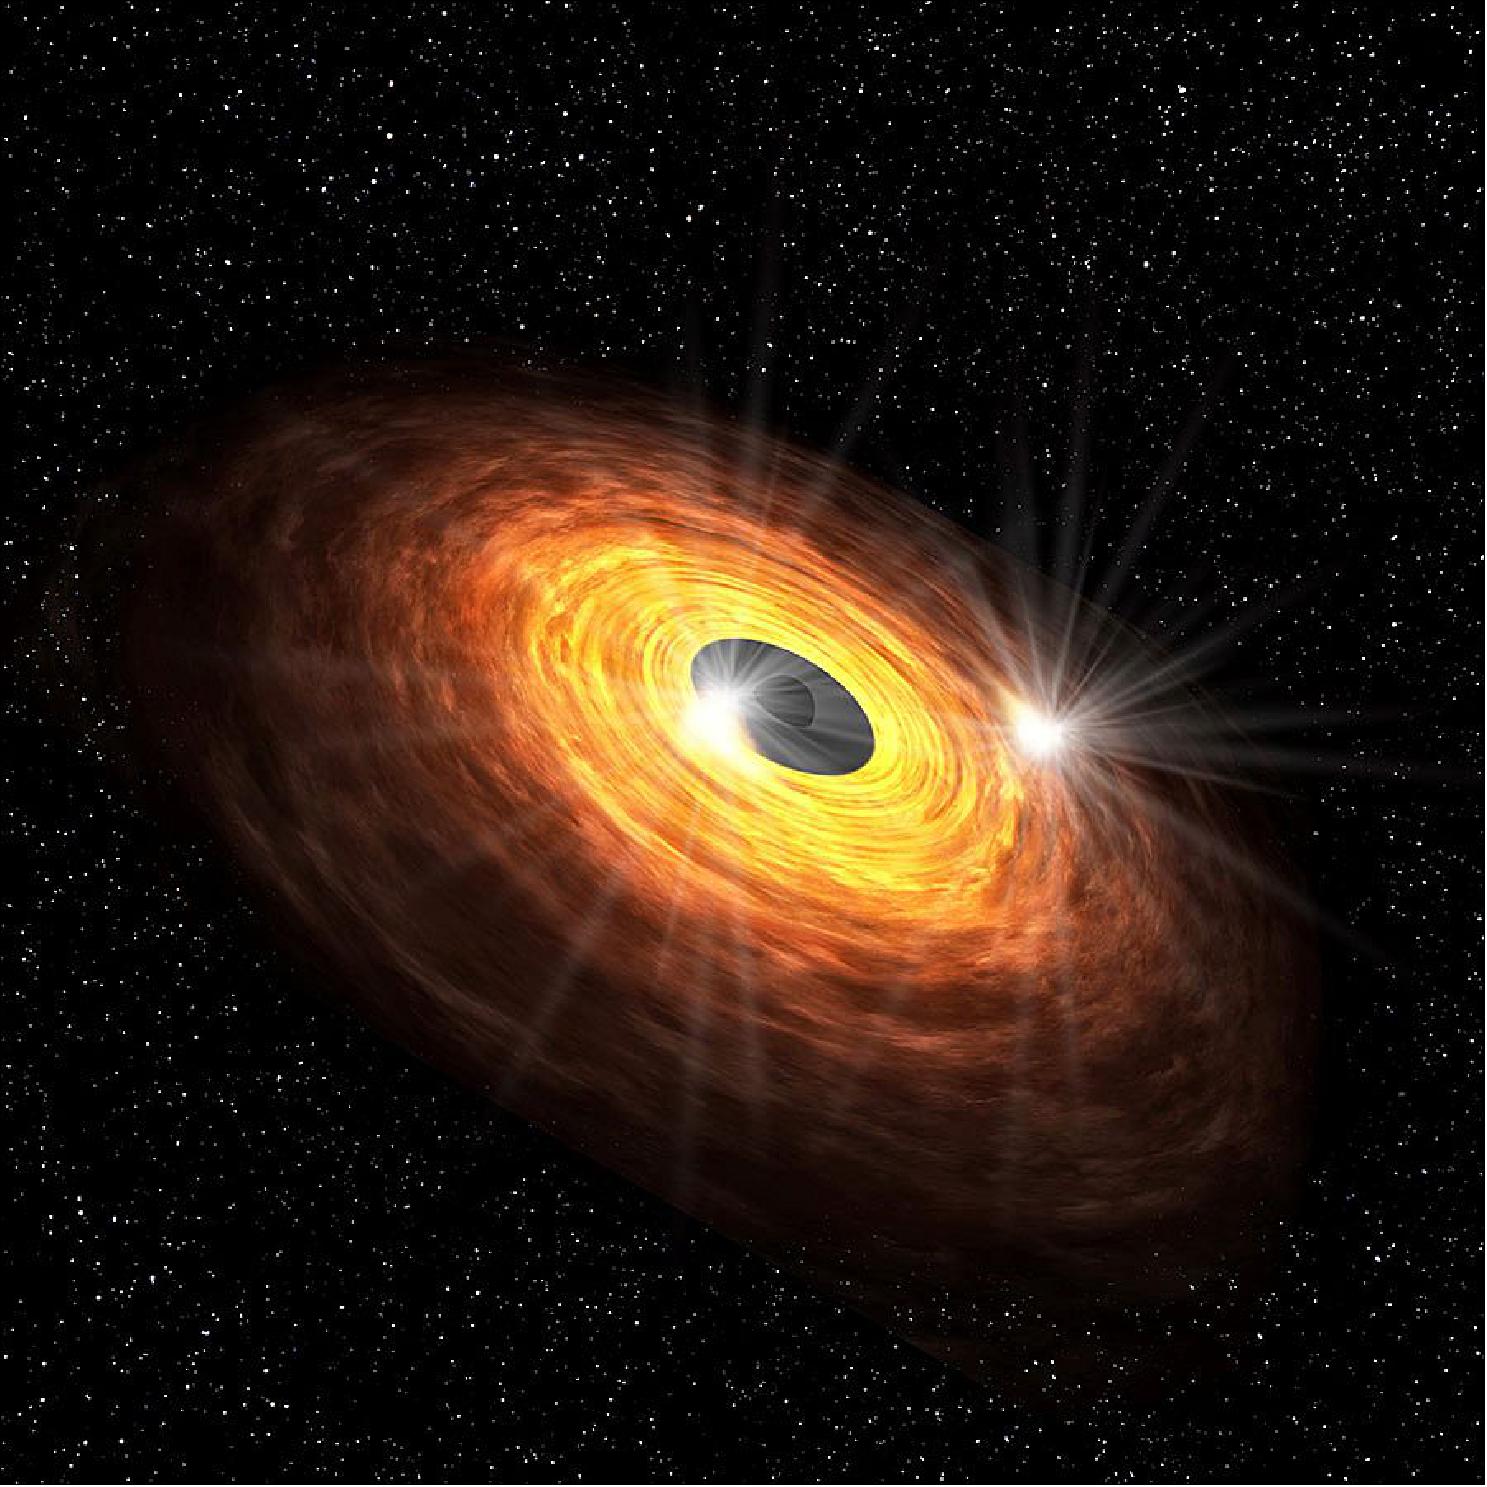 Figure 62: Artist’s impression of the gaseous disk around the supermassive black hole. Hot spots circling around the black hole could produce the quasi-periodic millimeter emission detected with ALMA (image credit: Keio University)